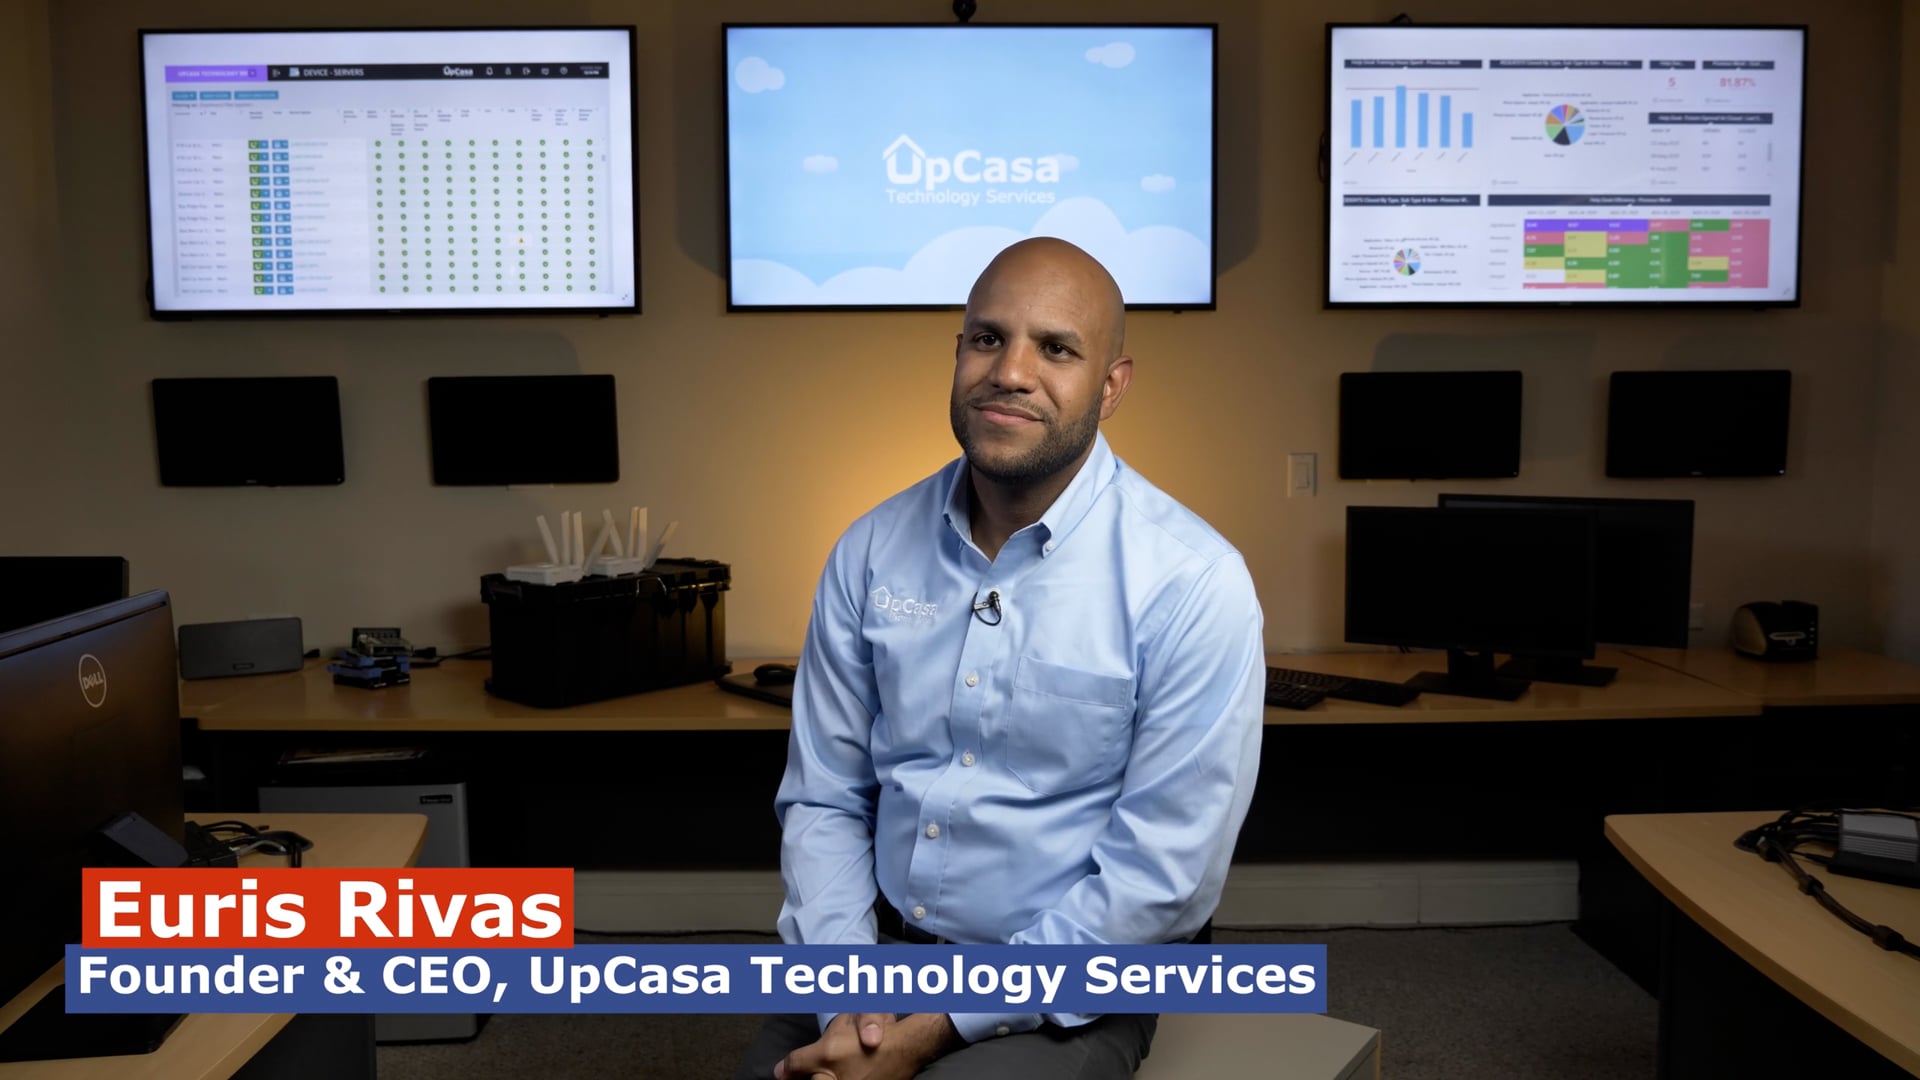 UpCasa Technology Services video business card